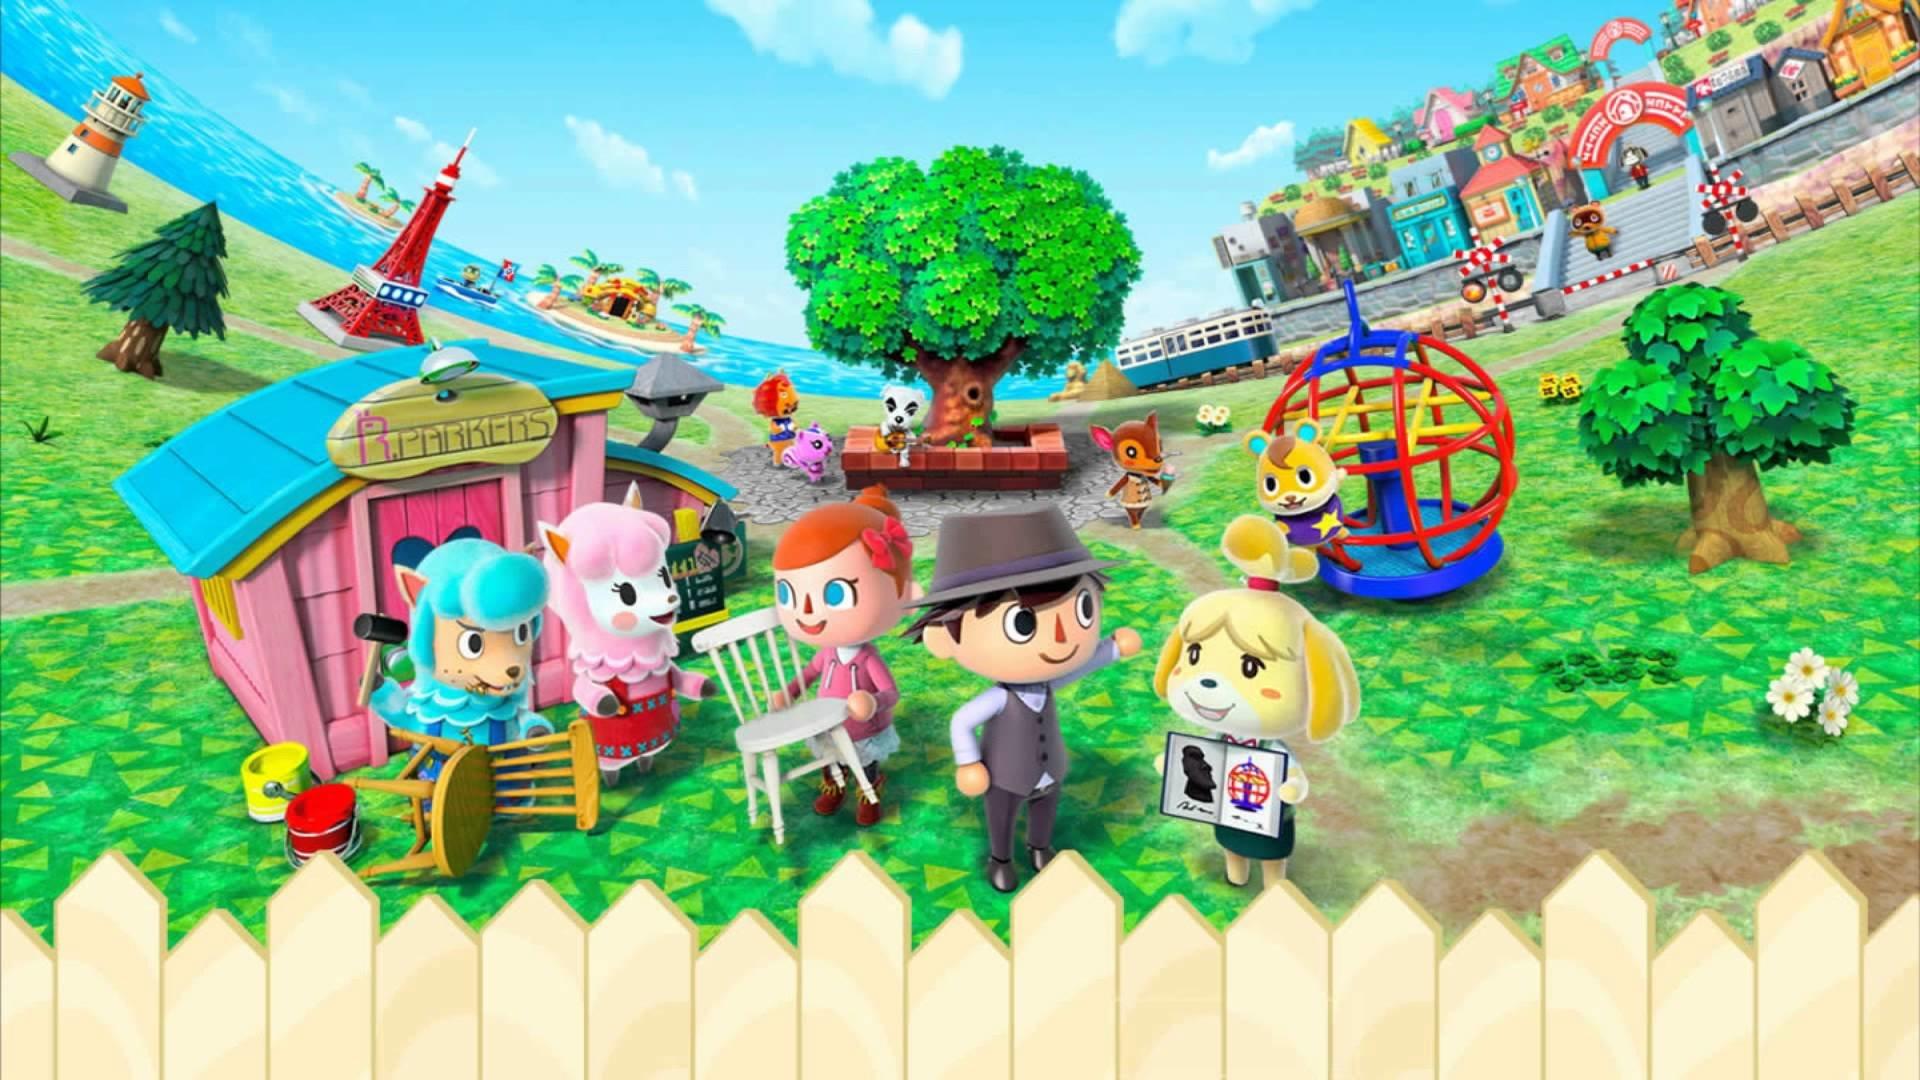 Why Nintendo chose 'Animal Crossing' over 'Mario' for mobile